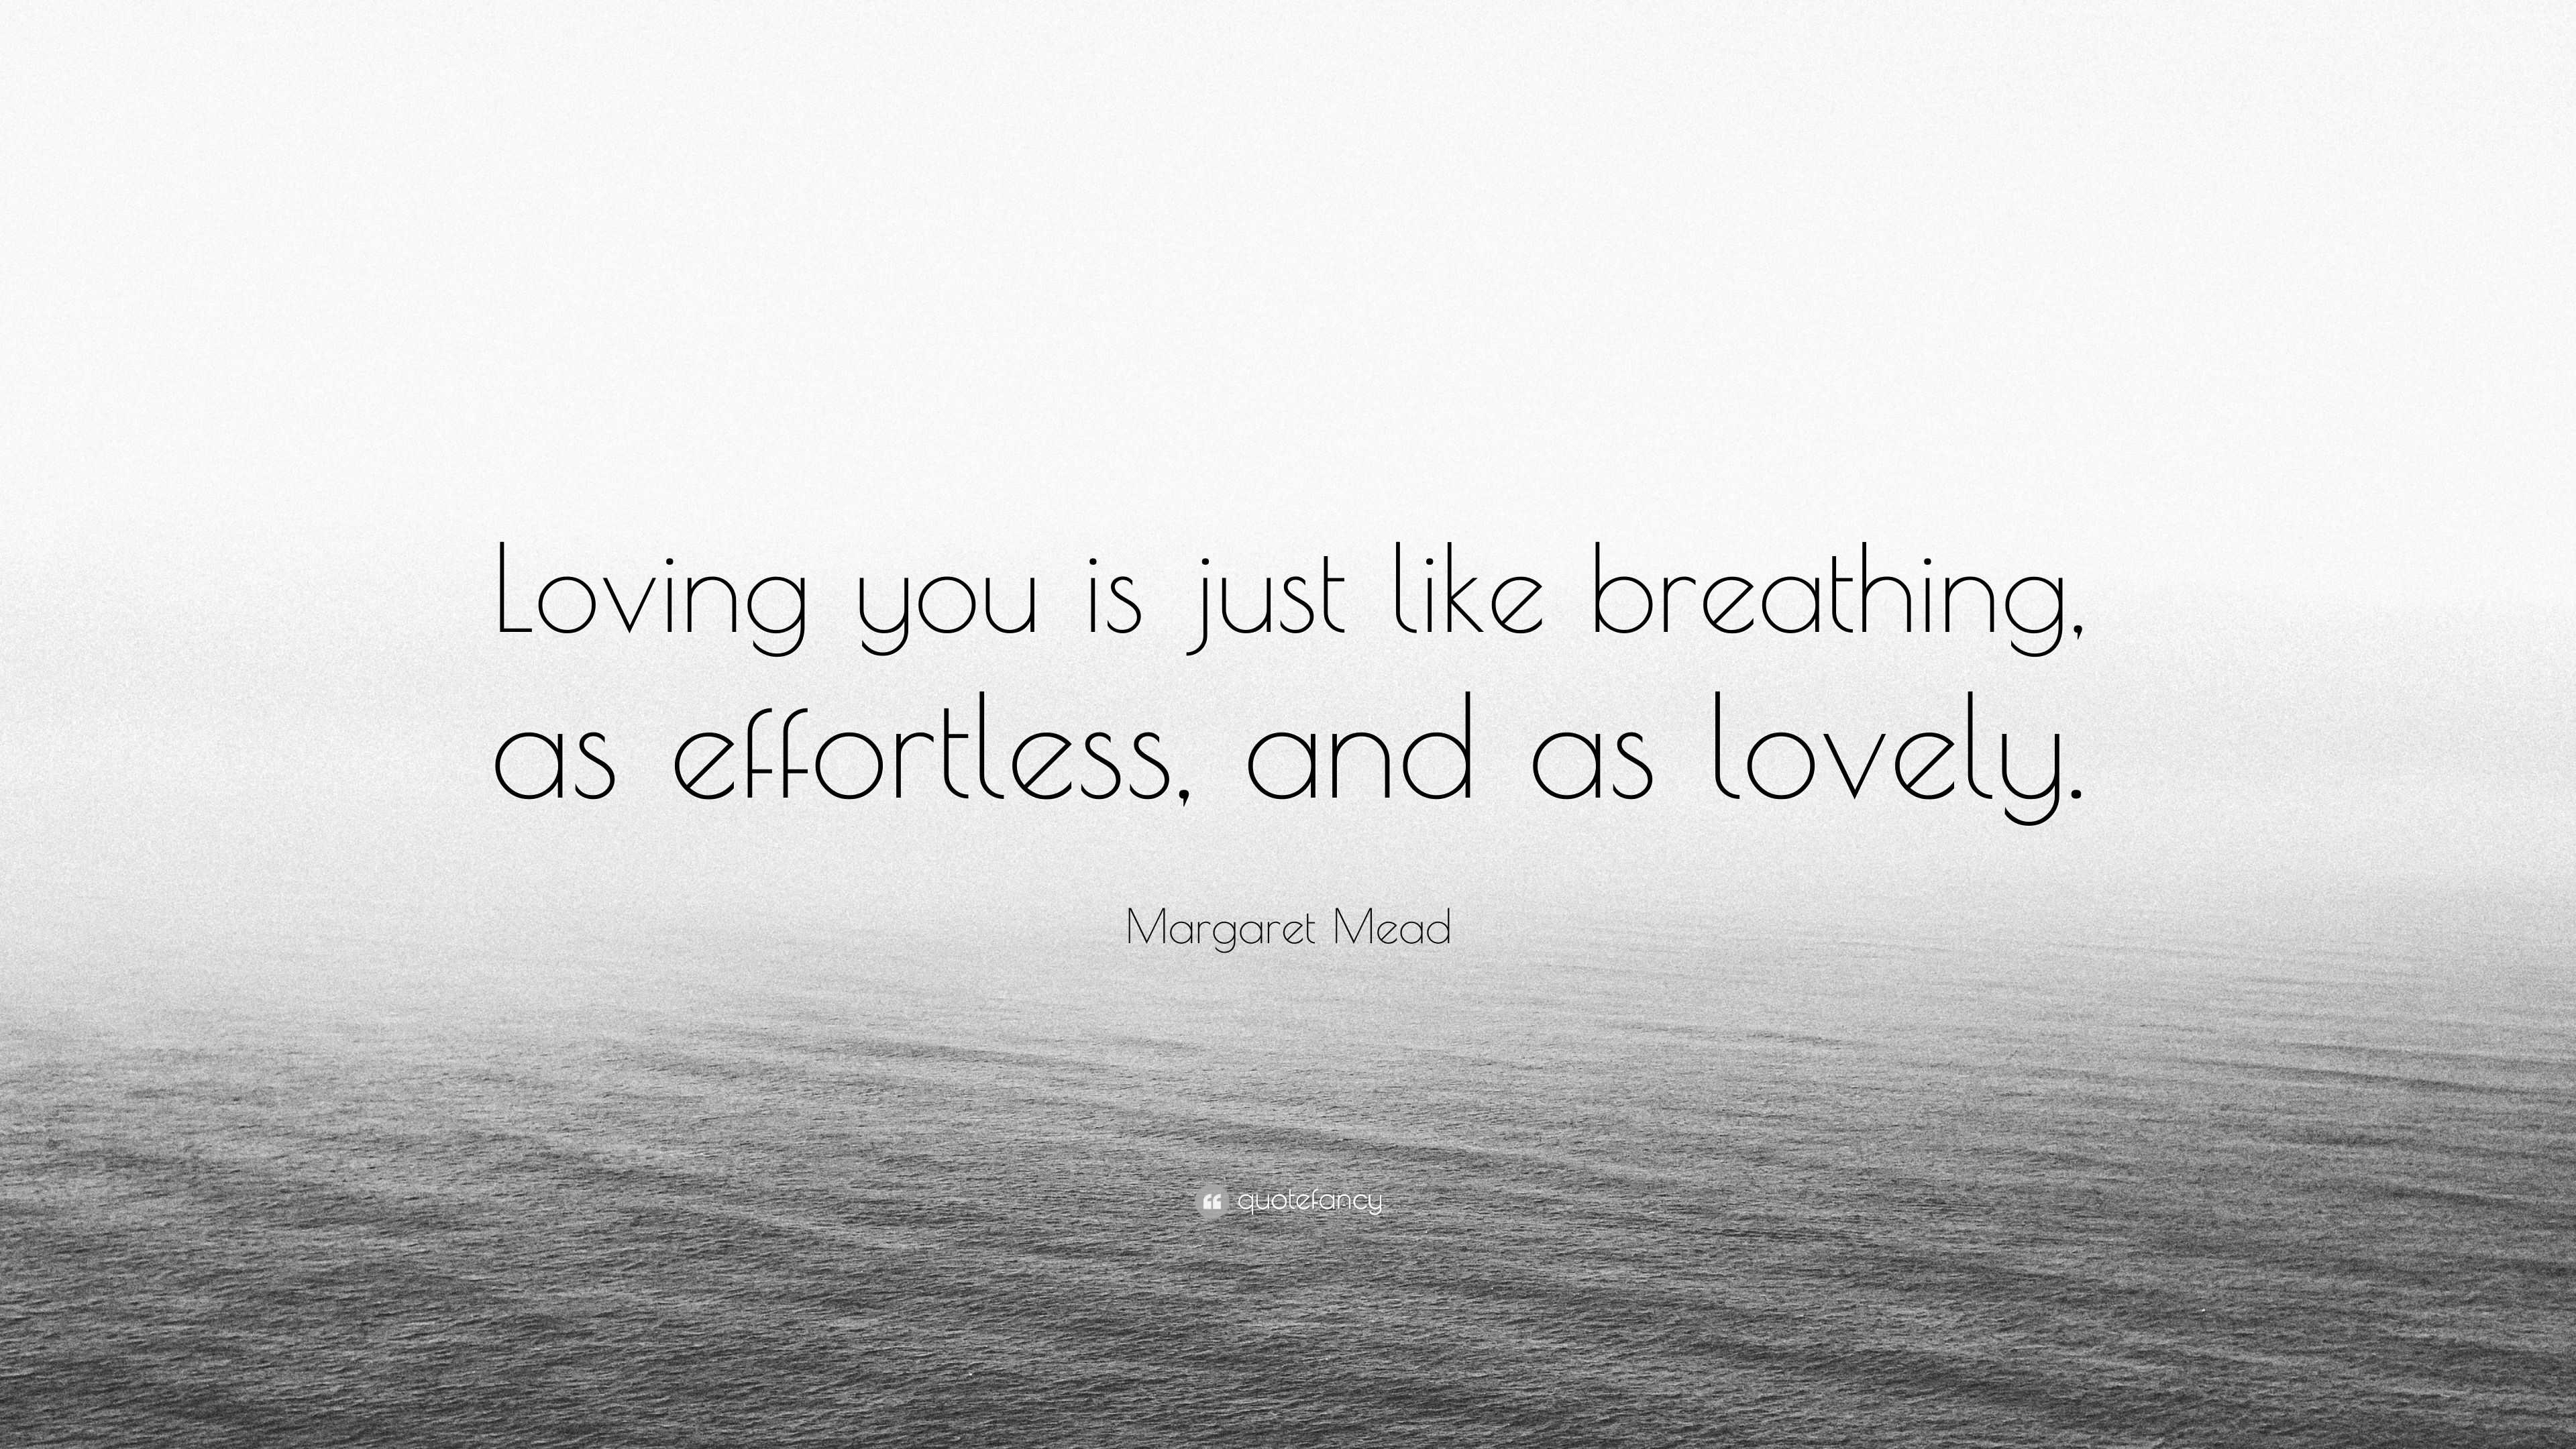 Margaret Mead Quote “Loving you is just like breathing as effortless and